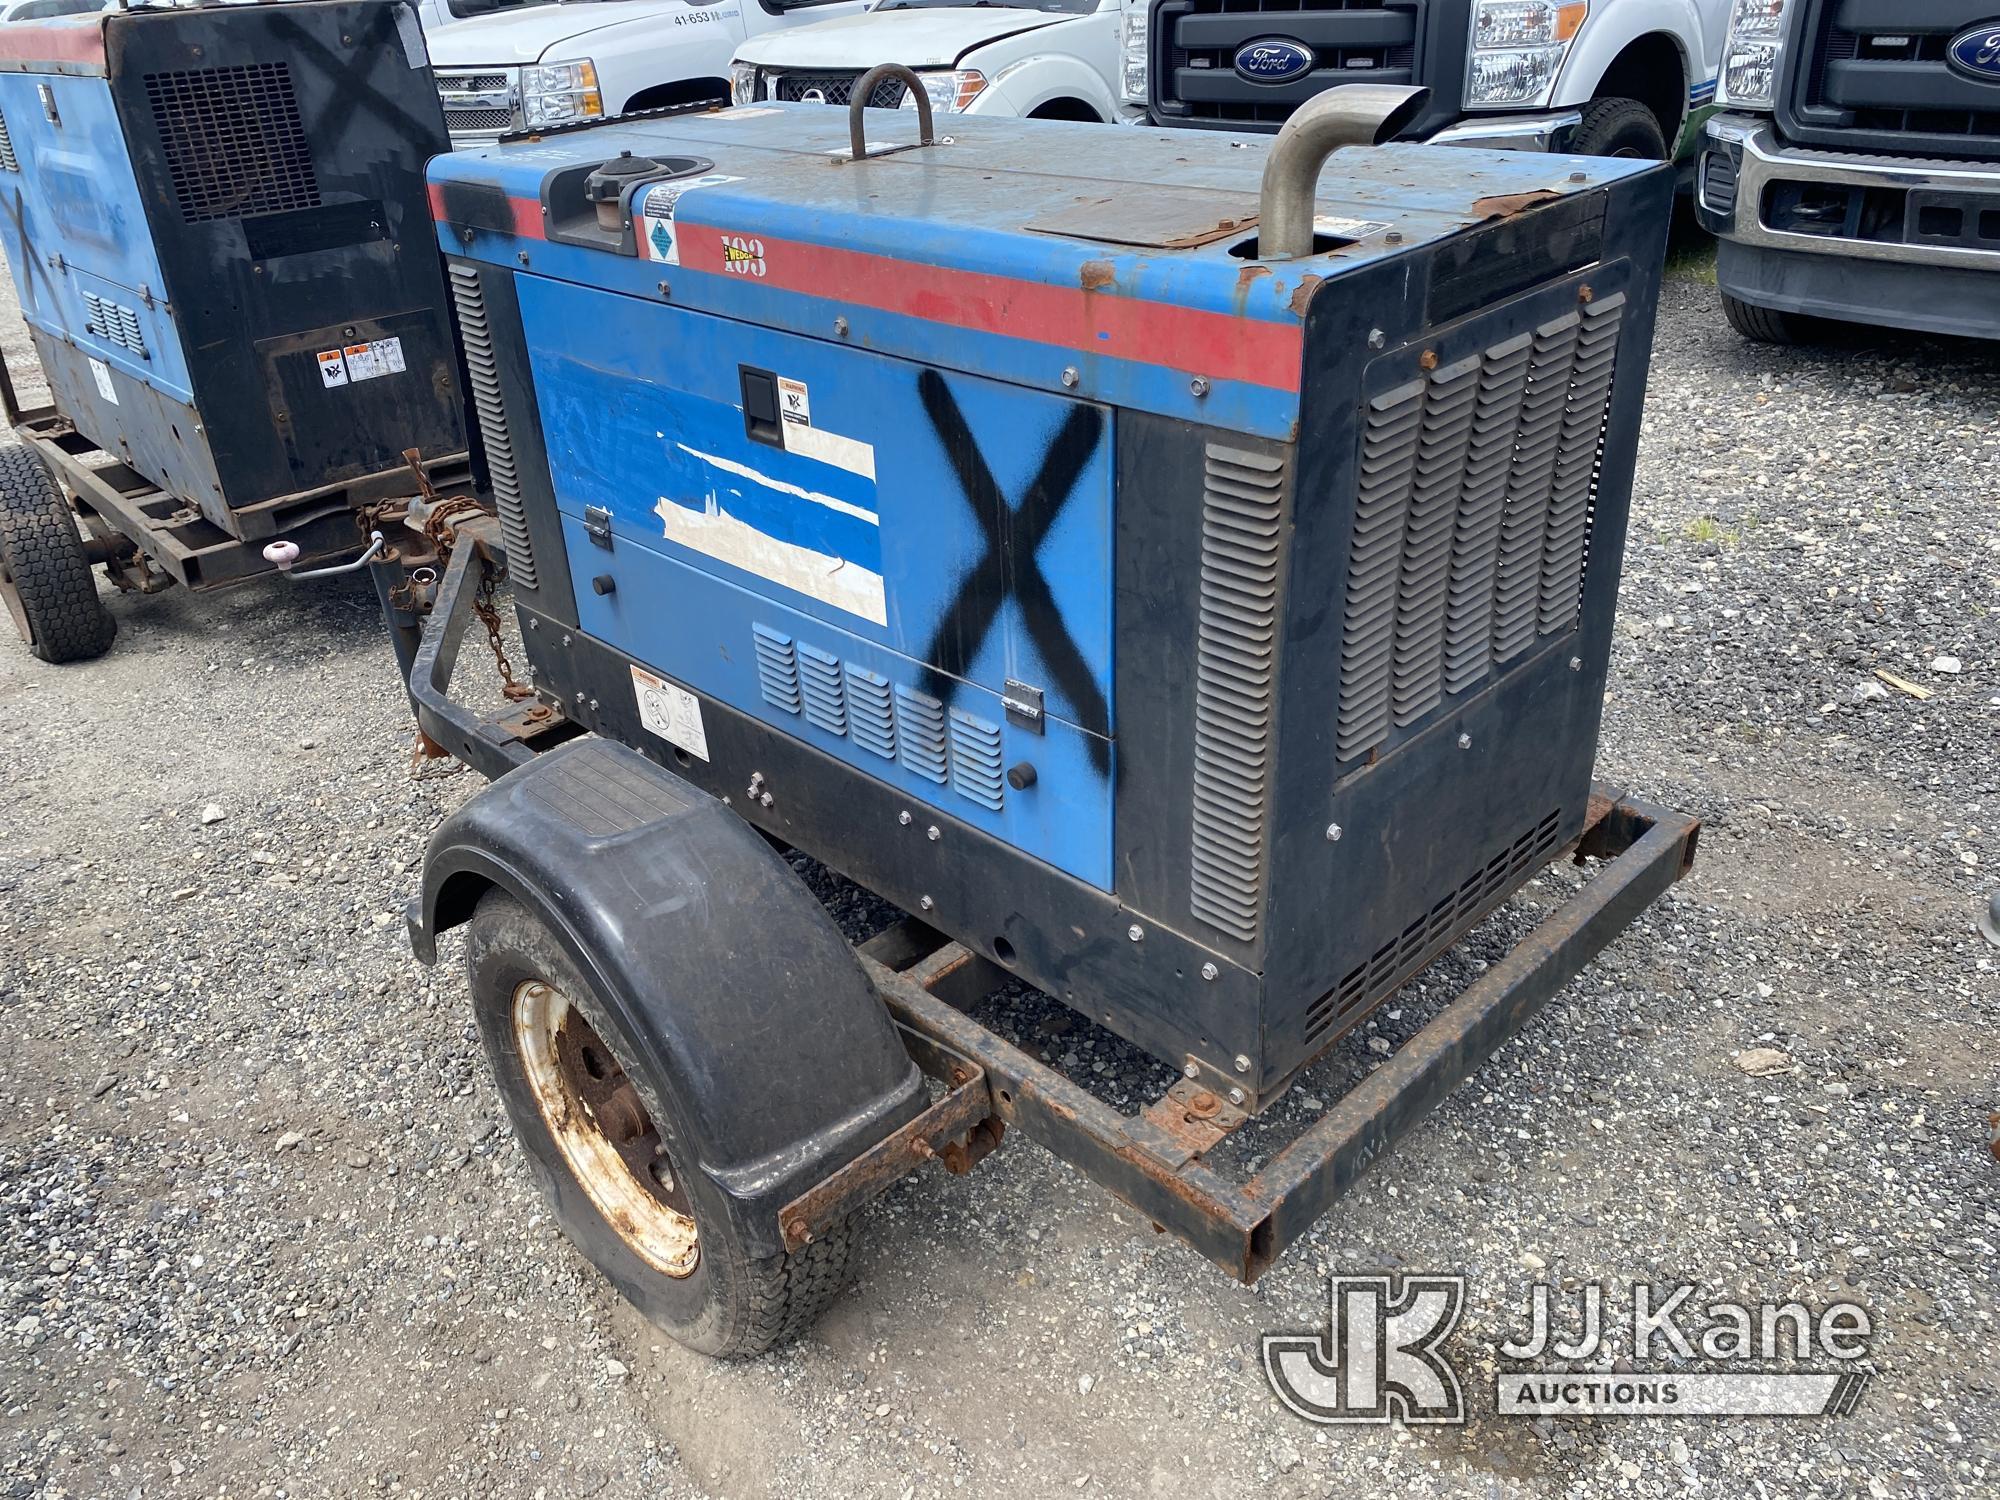 (Plymouth Meeting, PA) Miller Big Blue 450 Welder/Generator Not Running Condition Unknown